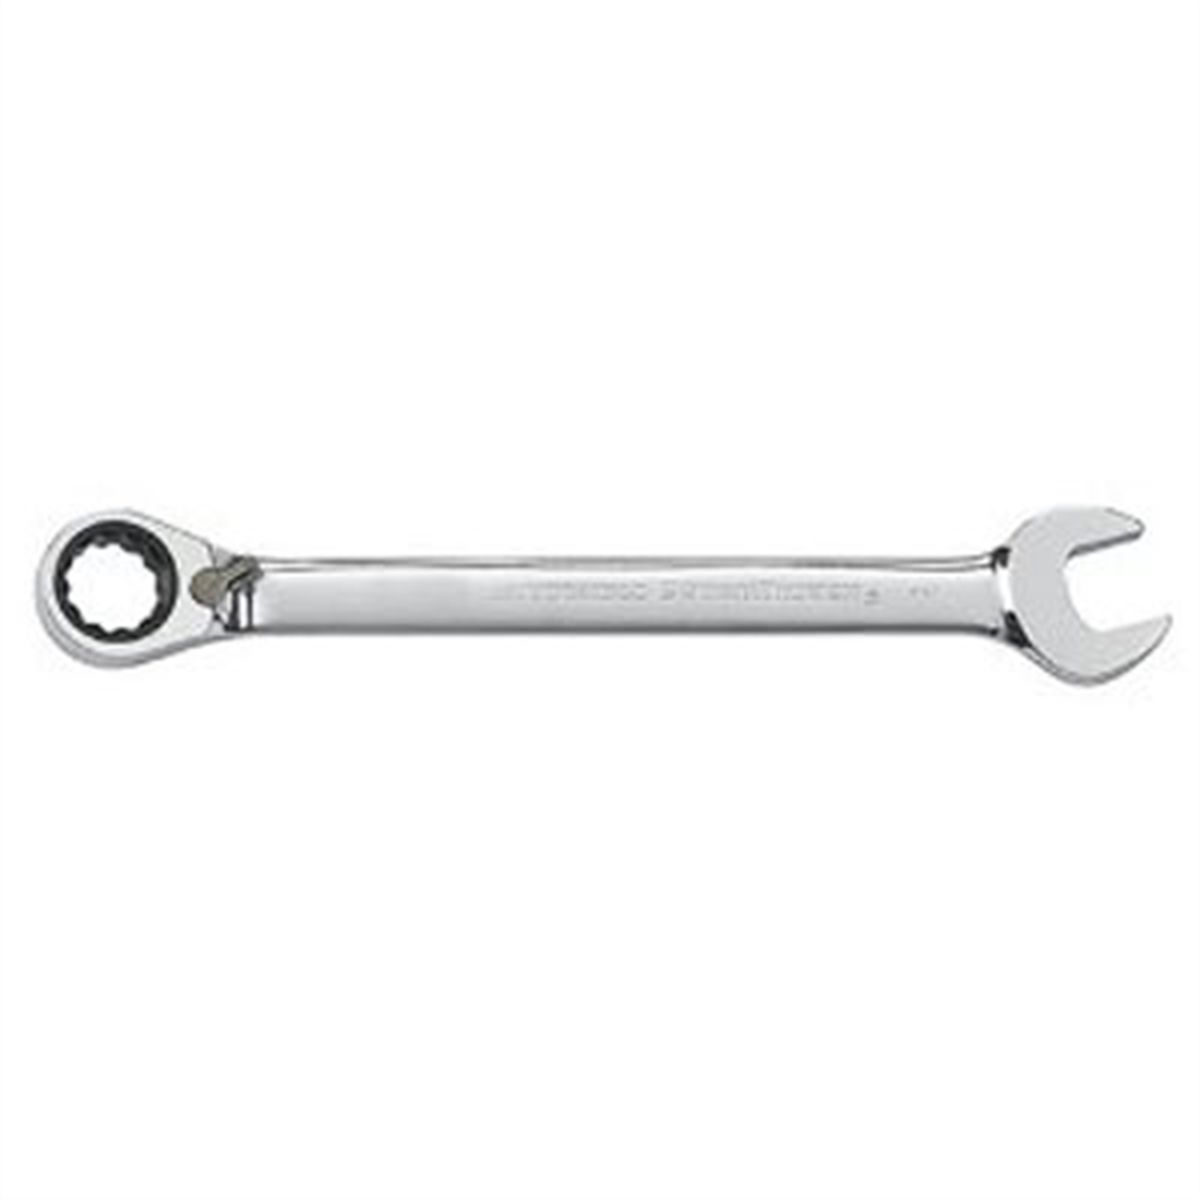 13/16" Reverse Combination Wrench